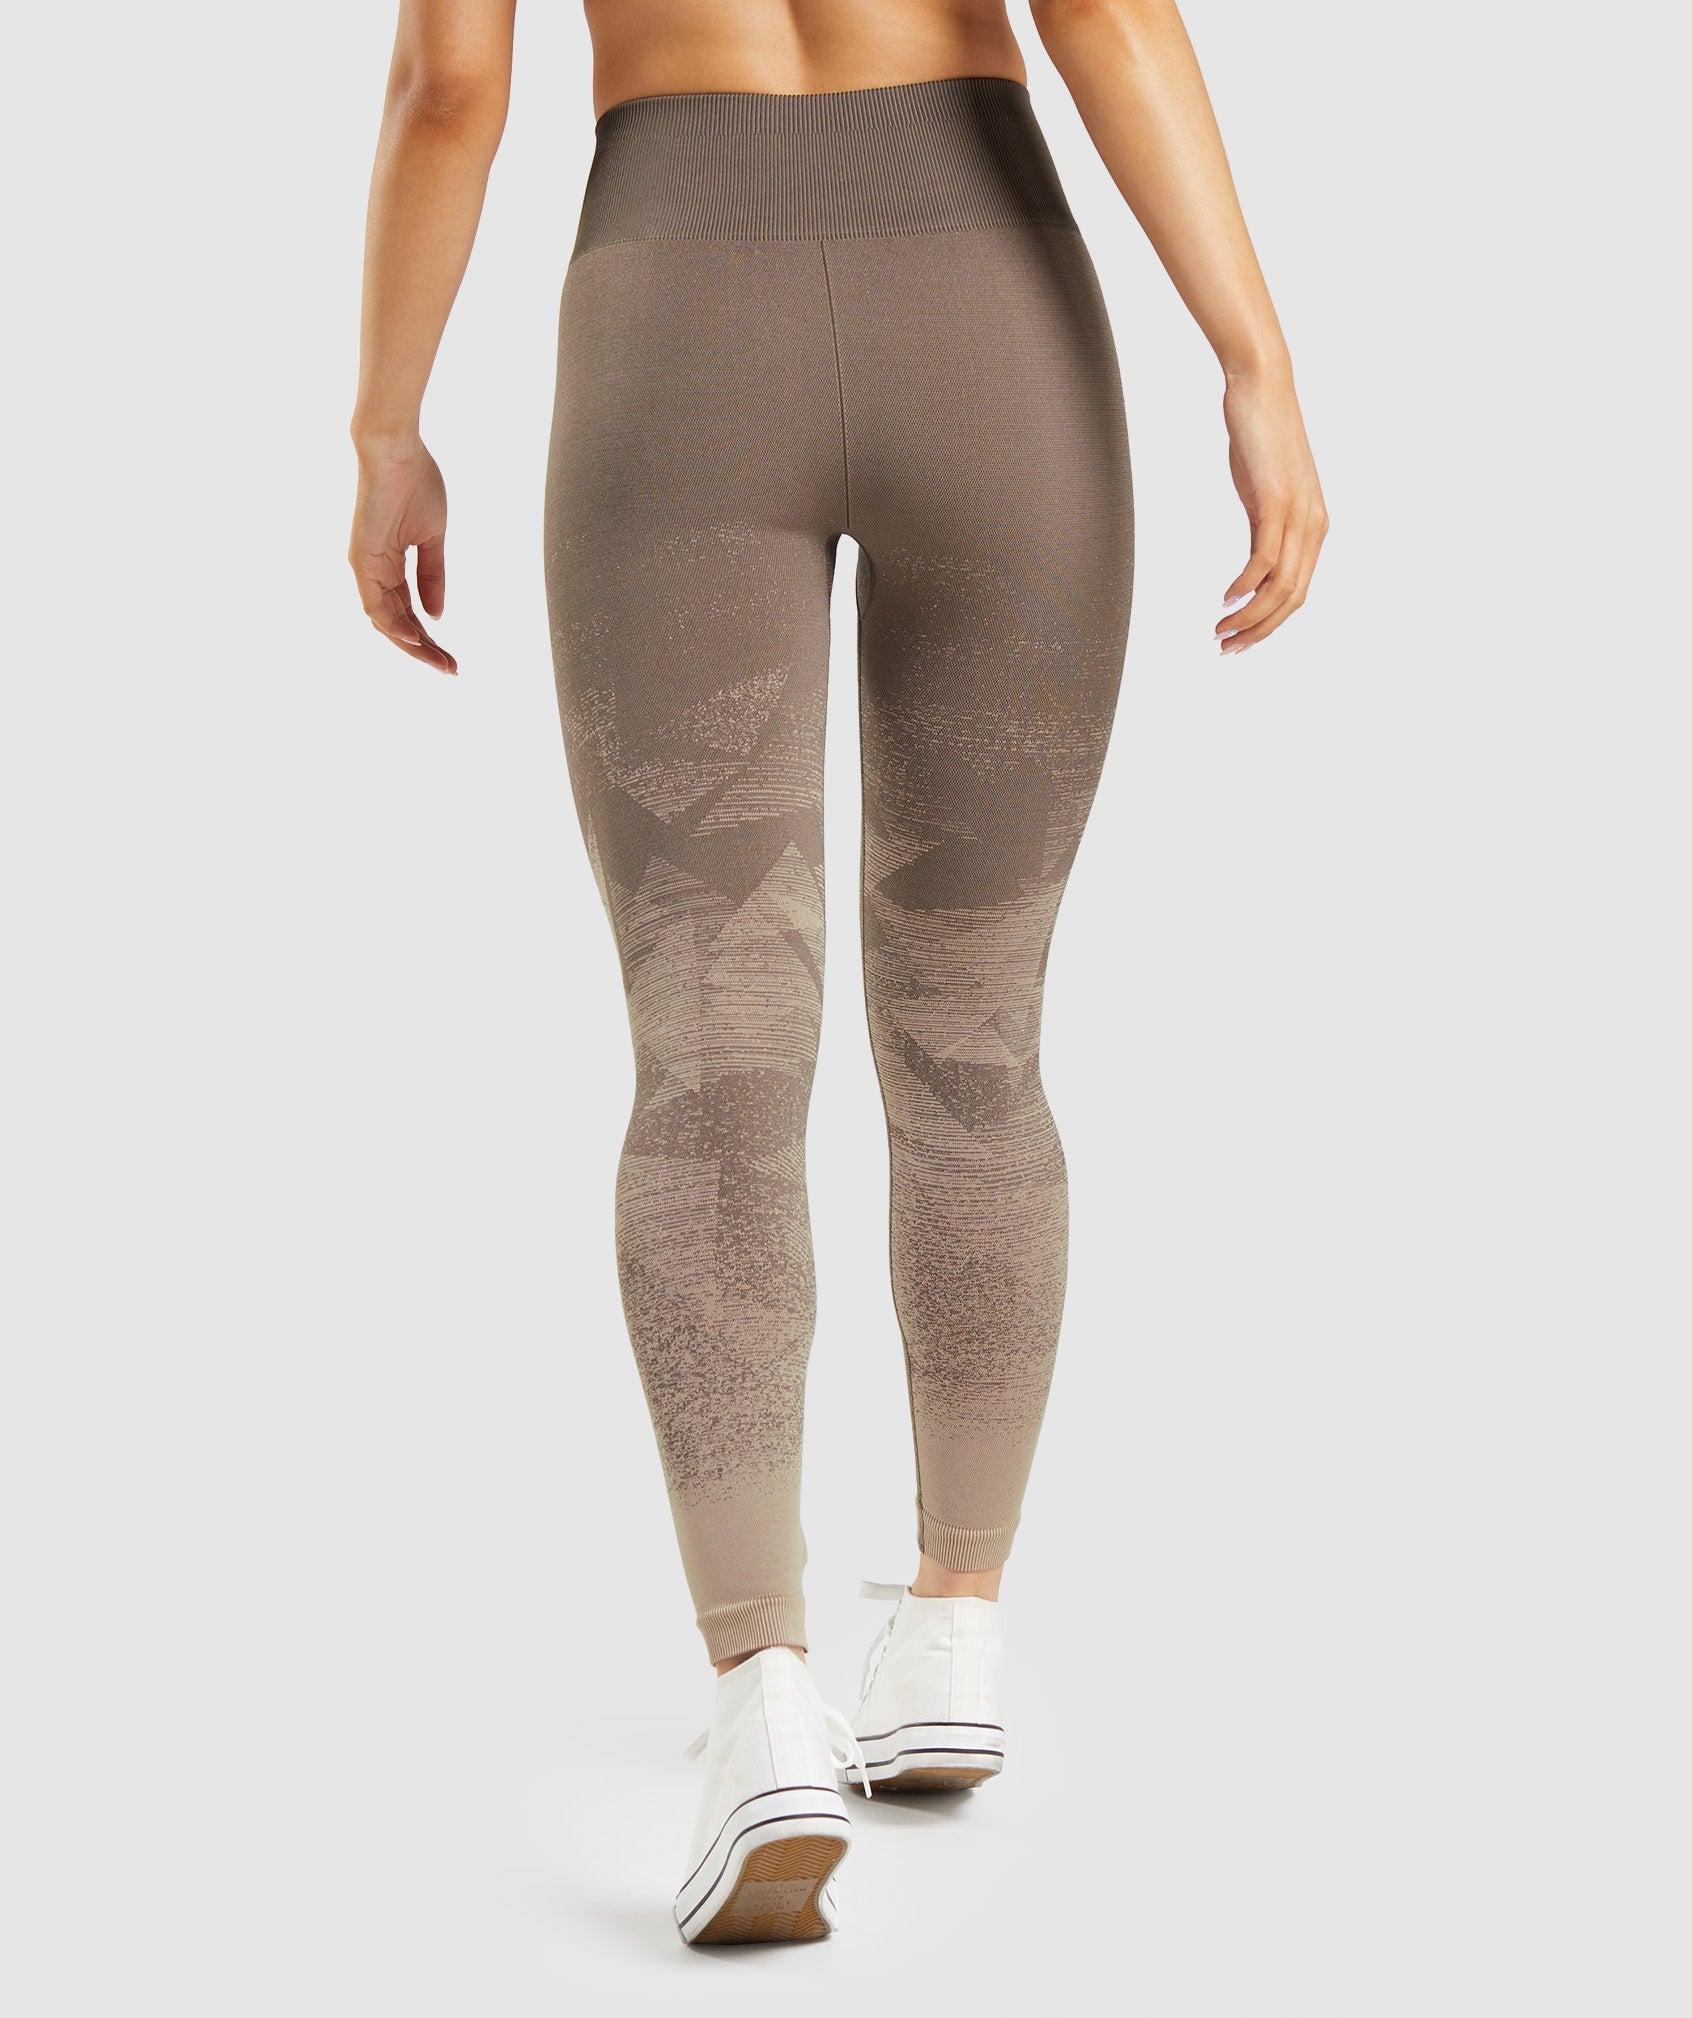 Gymshark Ombre Seamless Leggings Grey M Size M - $40 - From Raquel